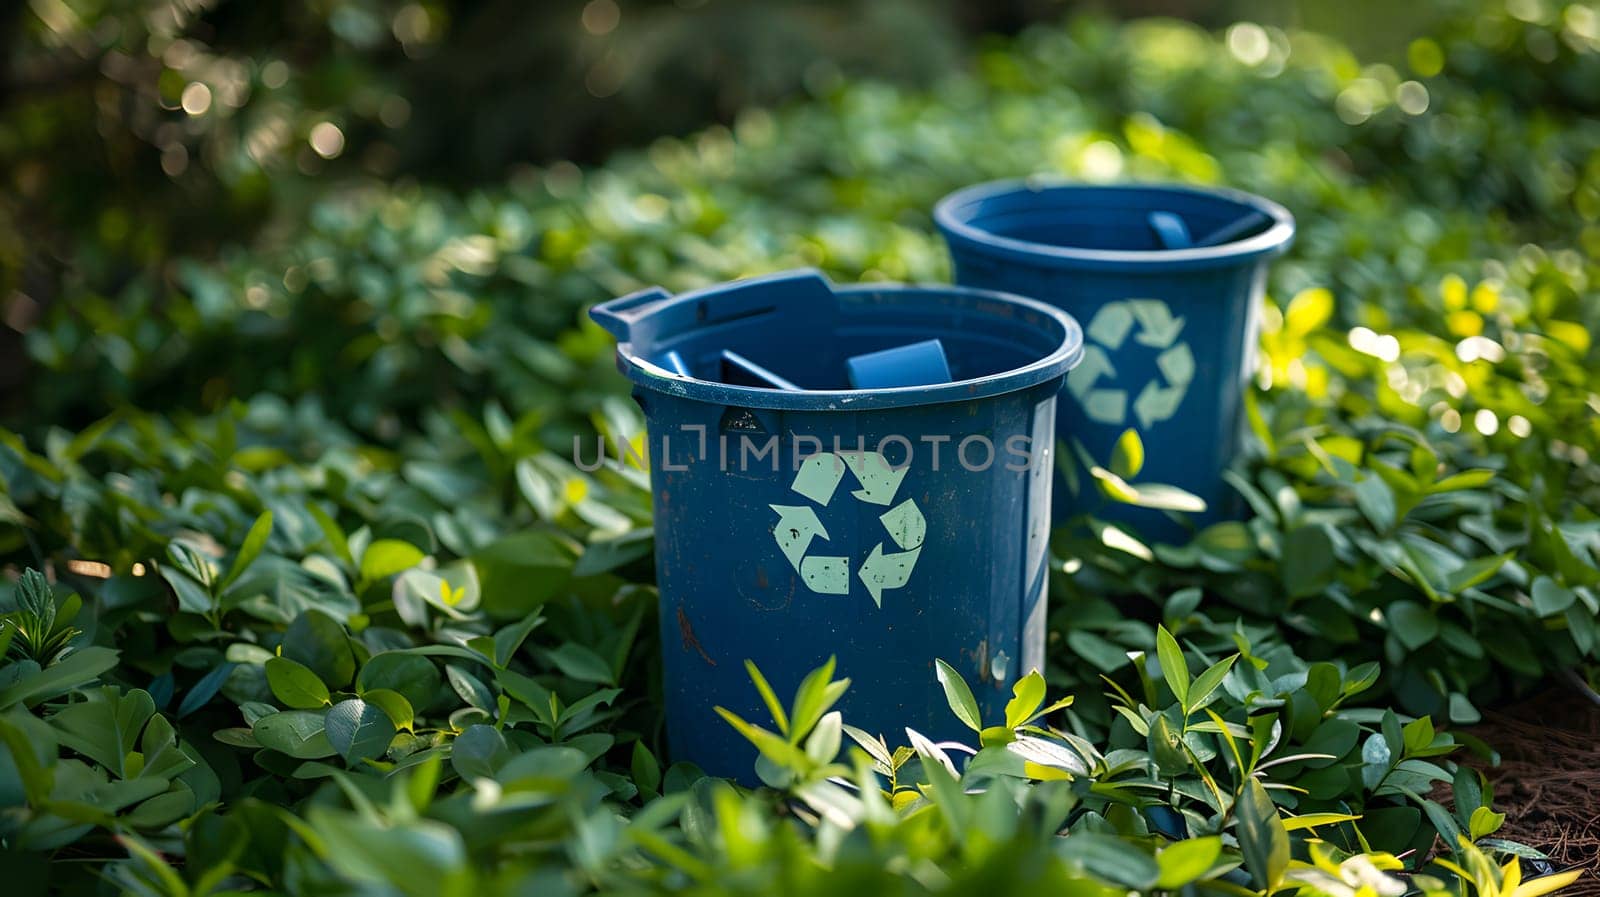 Two electric blue waste containers are placed on the grass, amidst a natural landscape with shrubs and terrestrial plants